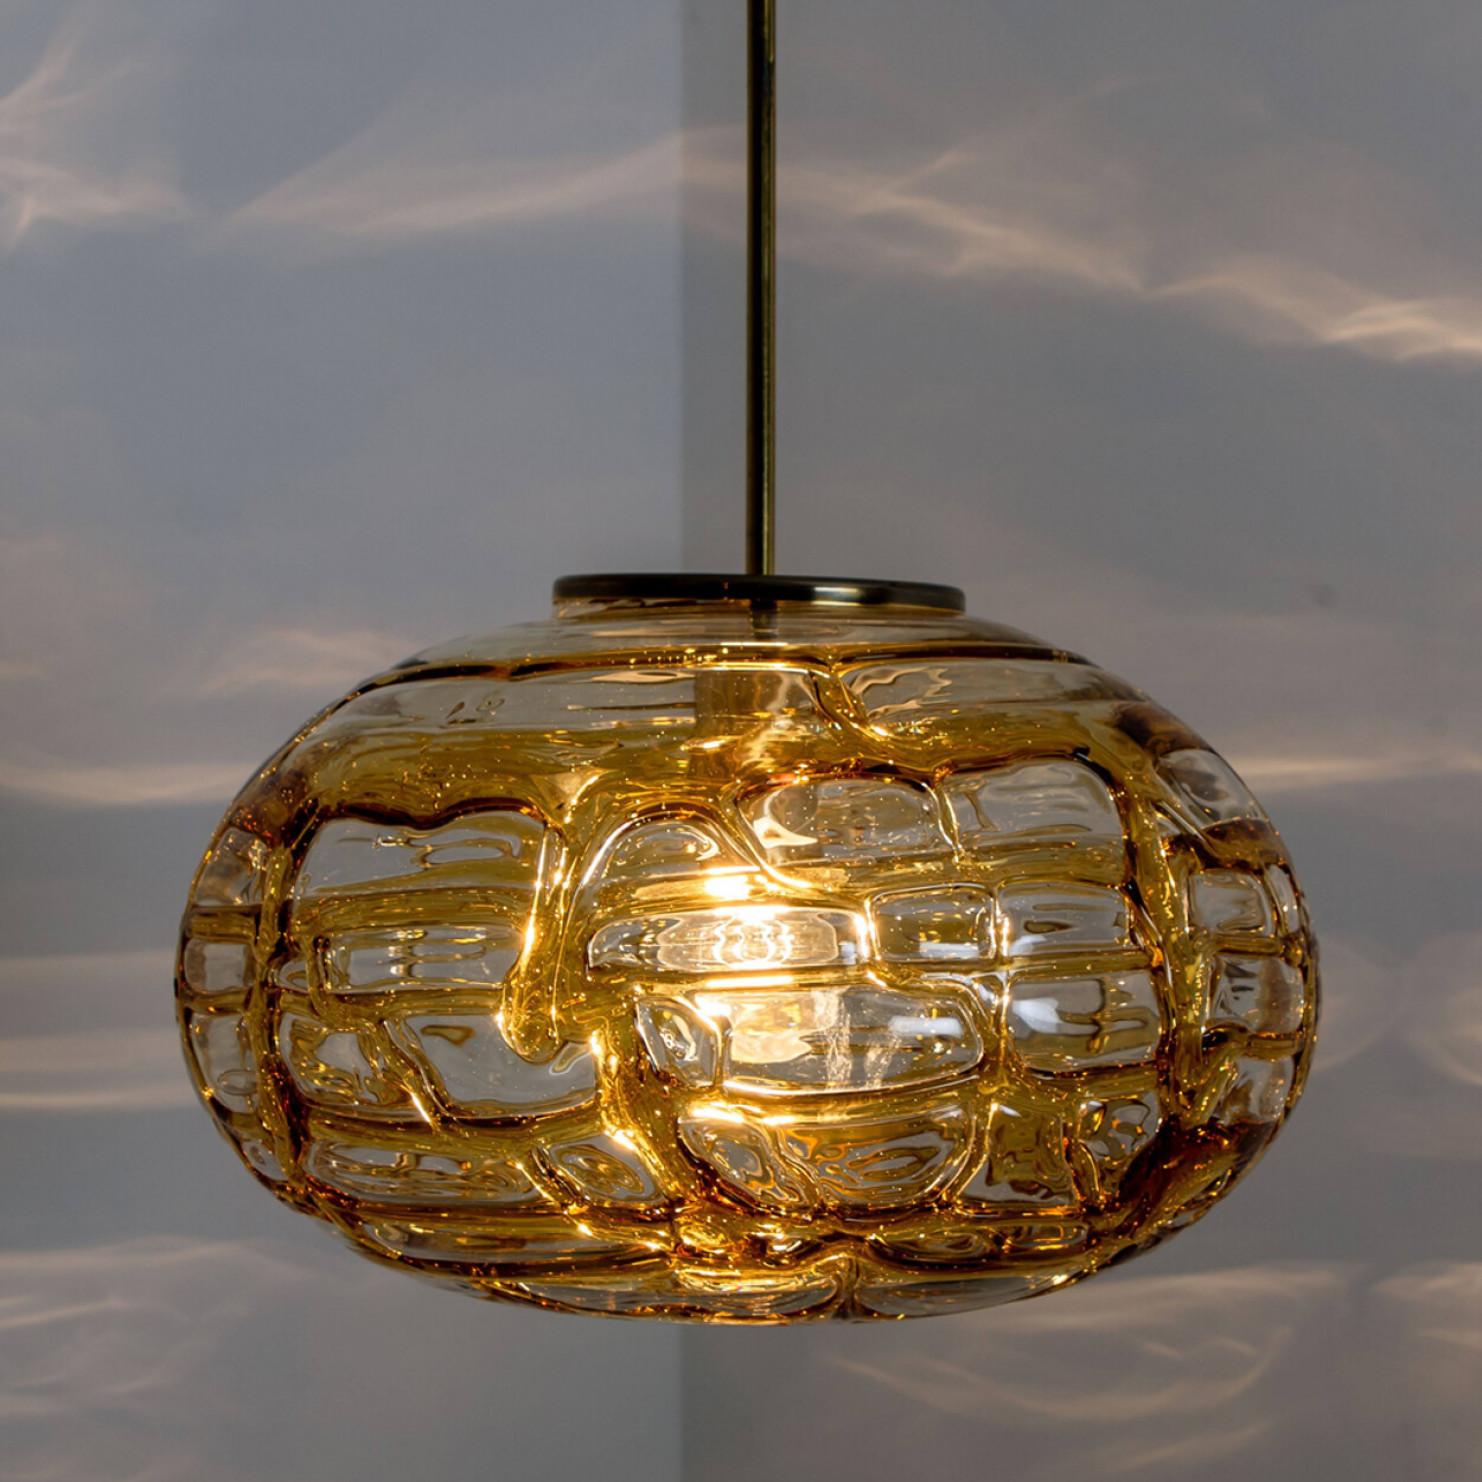 1 of the 3 Murano Yellow Glass Pendant Light, Different Shapes, 1960s For Sale 1